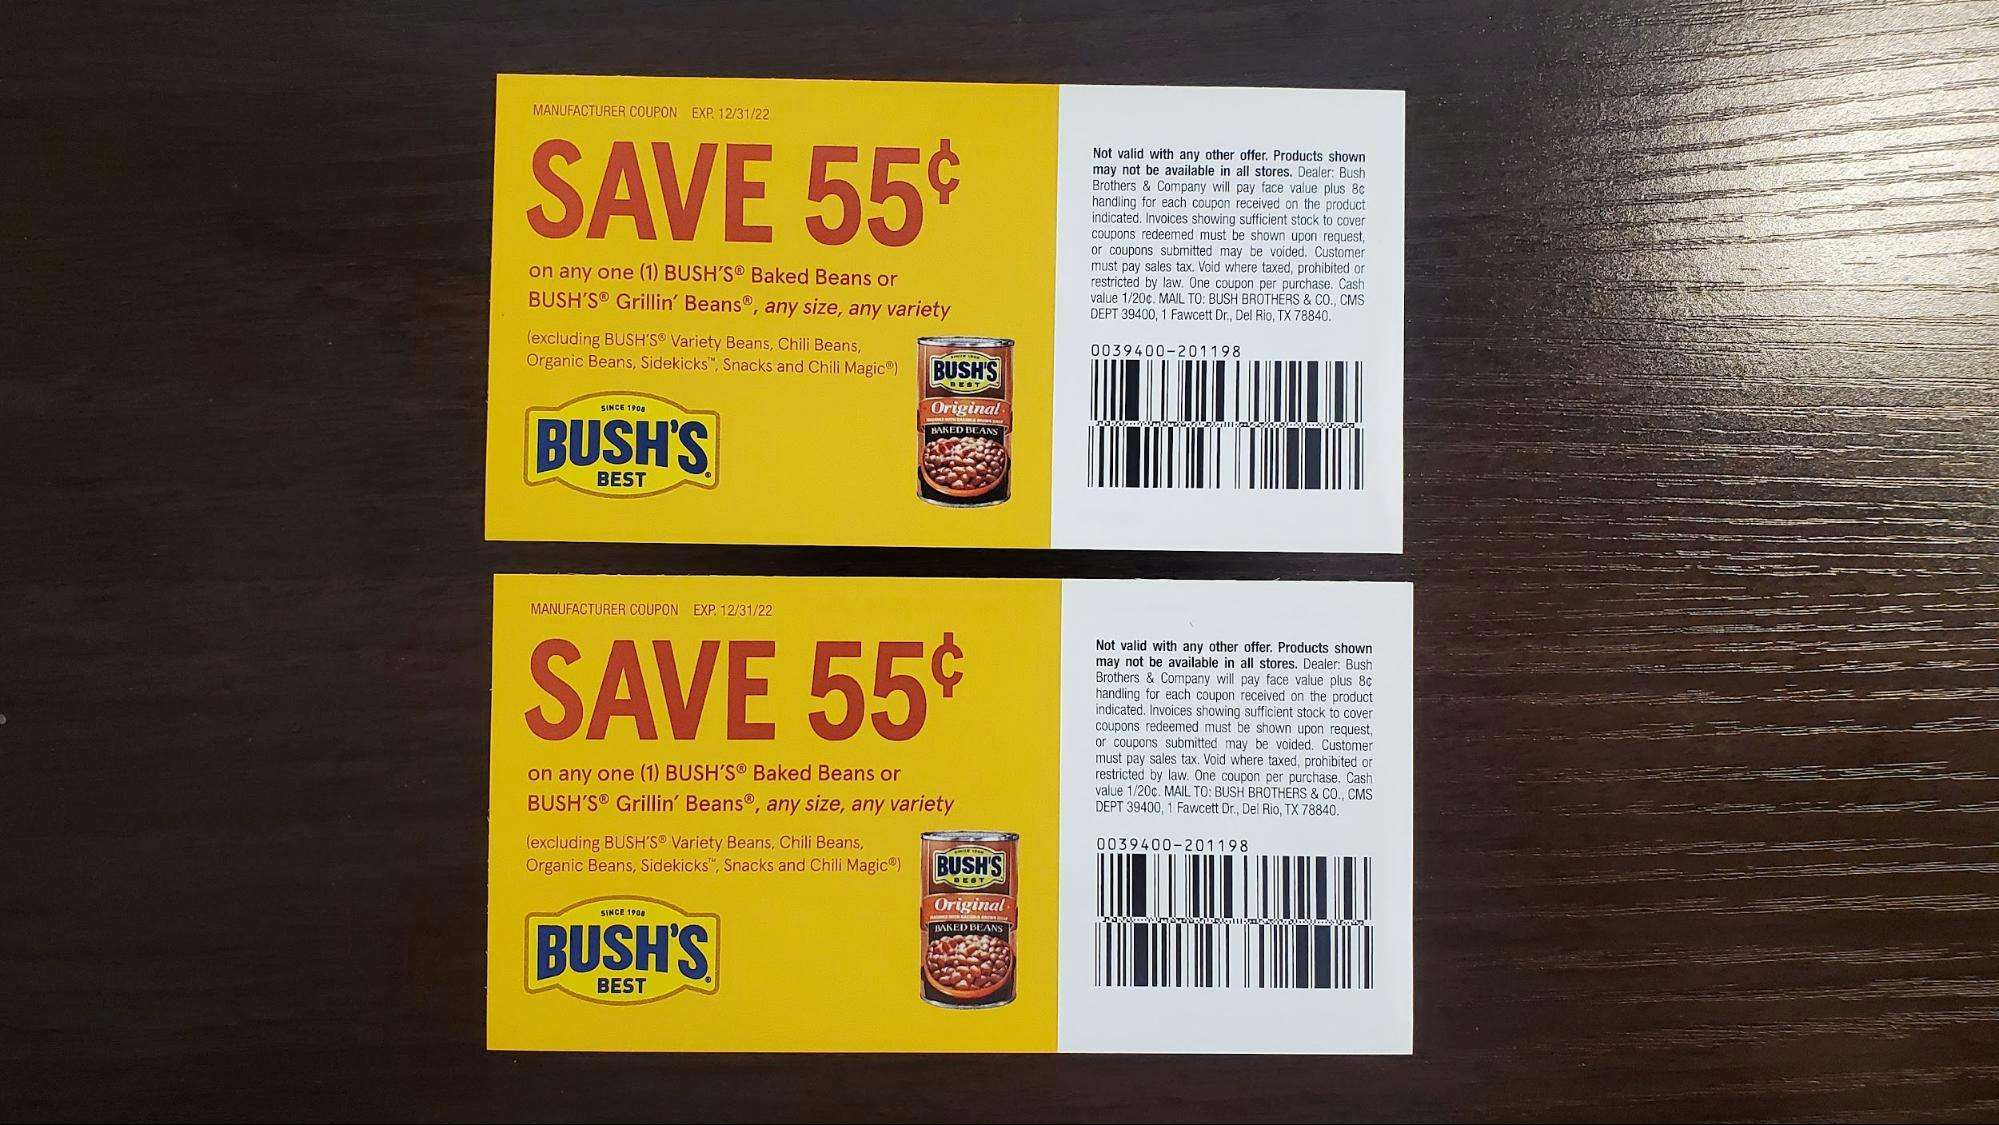 Free Bush's coupons by mail